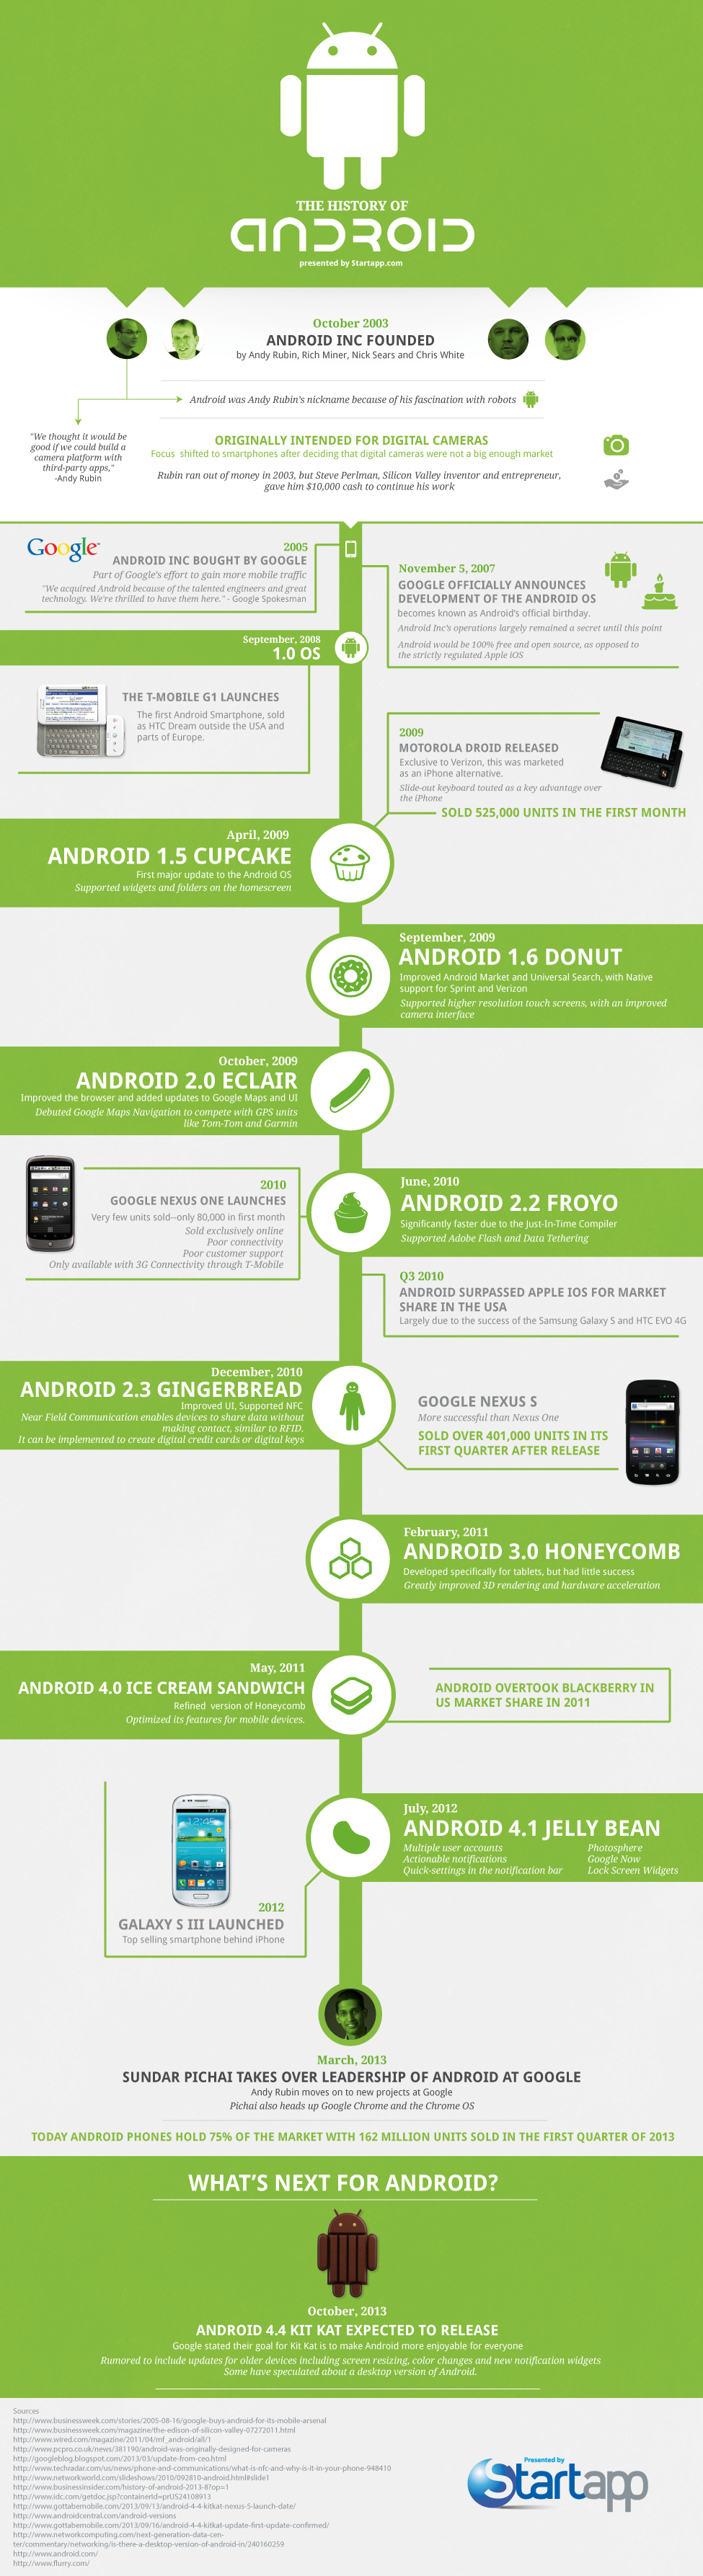 History-of-Android